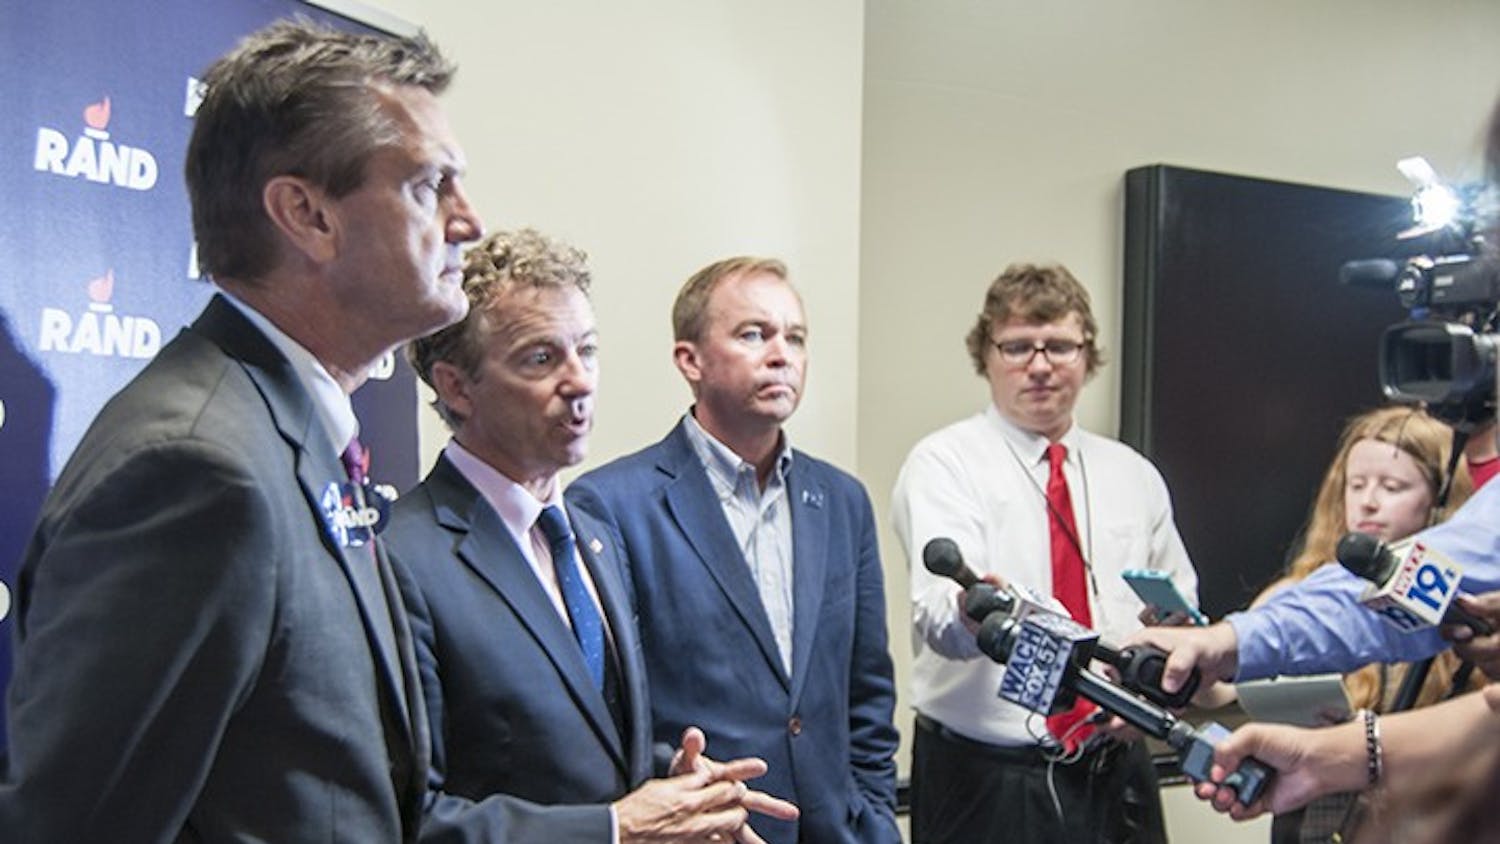 From left: South Carolina State Sen. Tom Davis, Kentucky Sen. Rand Paul and Rep. Mick Mulvaney. Republican presidential candidate Rand Paul addressed local media at the Russell House University Union before speaking to students. 